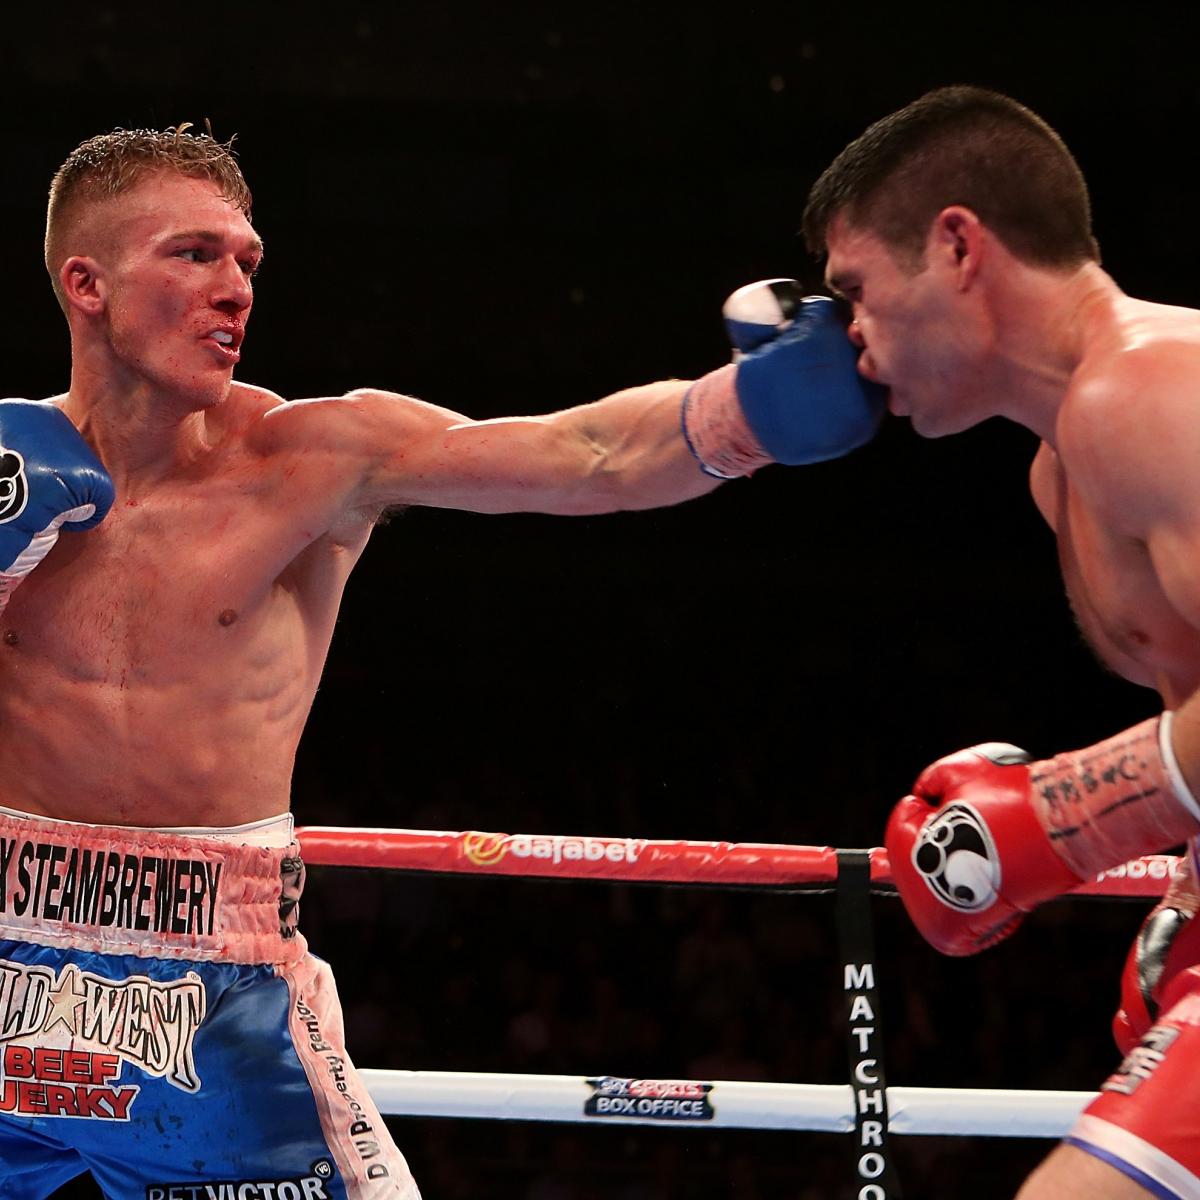 Nick Blackwell vs. Damon Jones: Fight Time, Date, Live Stream and TV Info, News, Scores, Highlights, Stats, and Rumors